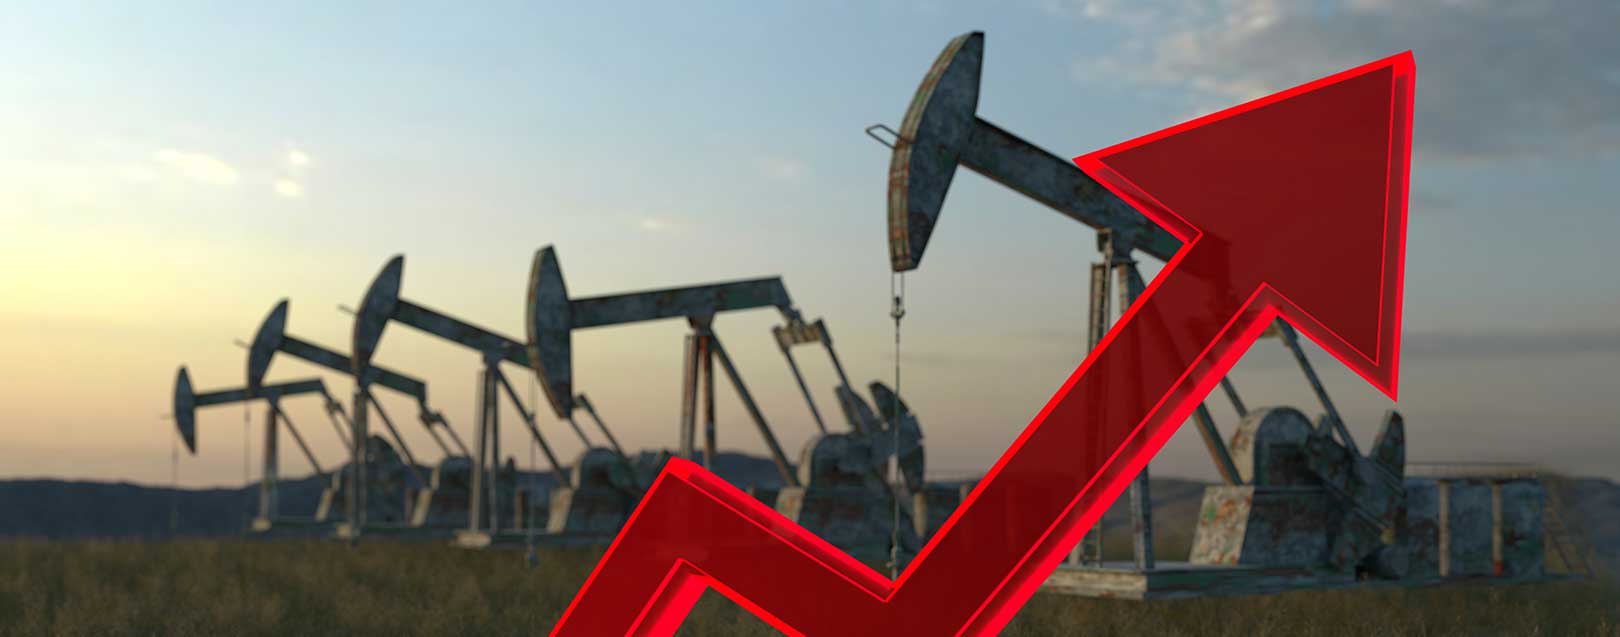 Oil prices easing on higher demand this year: IEA